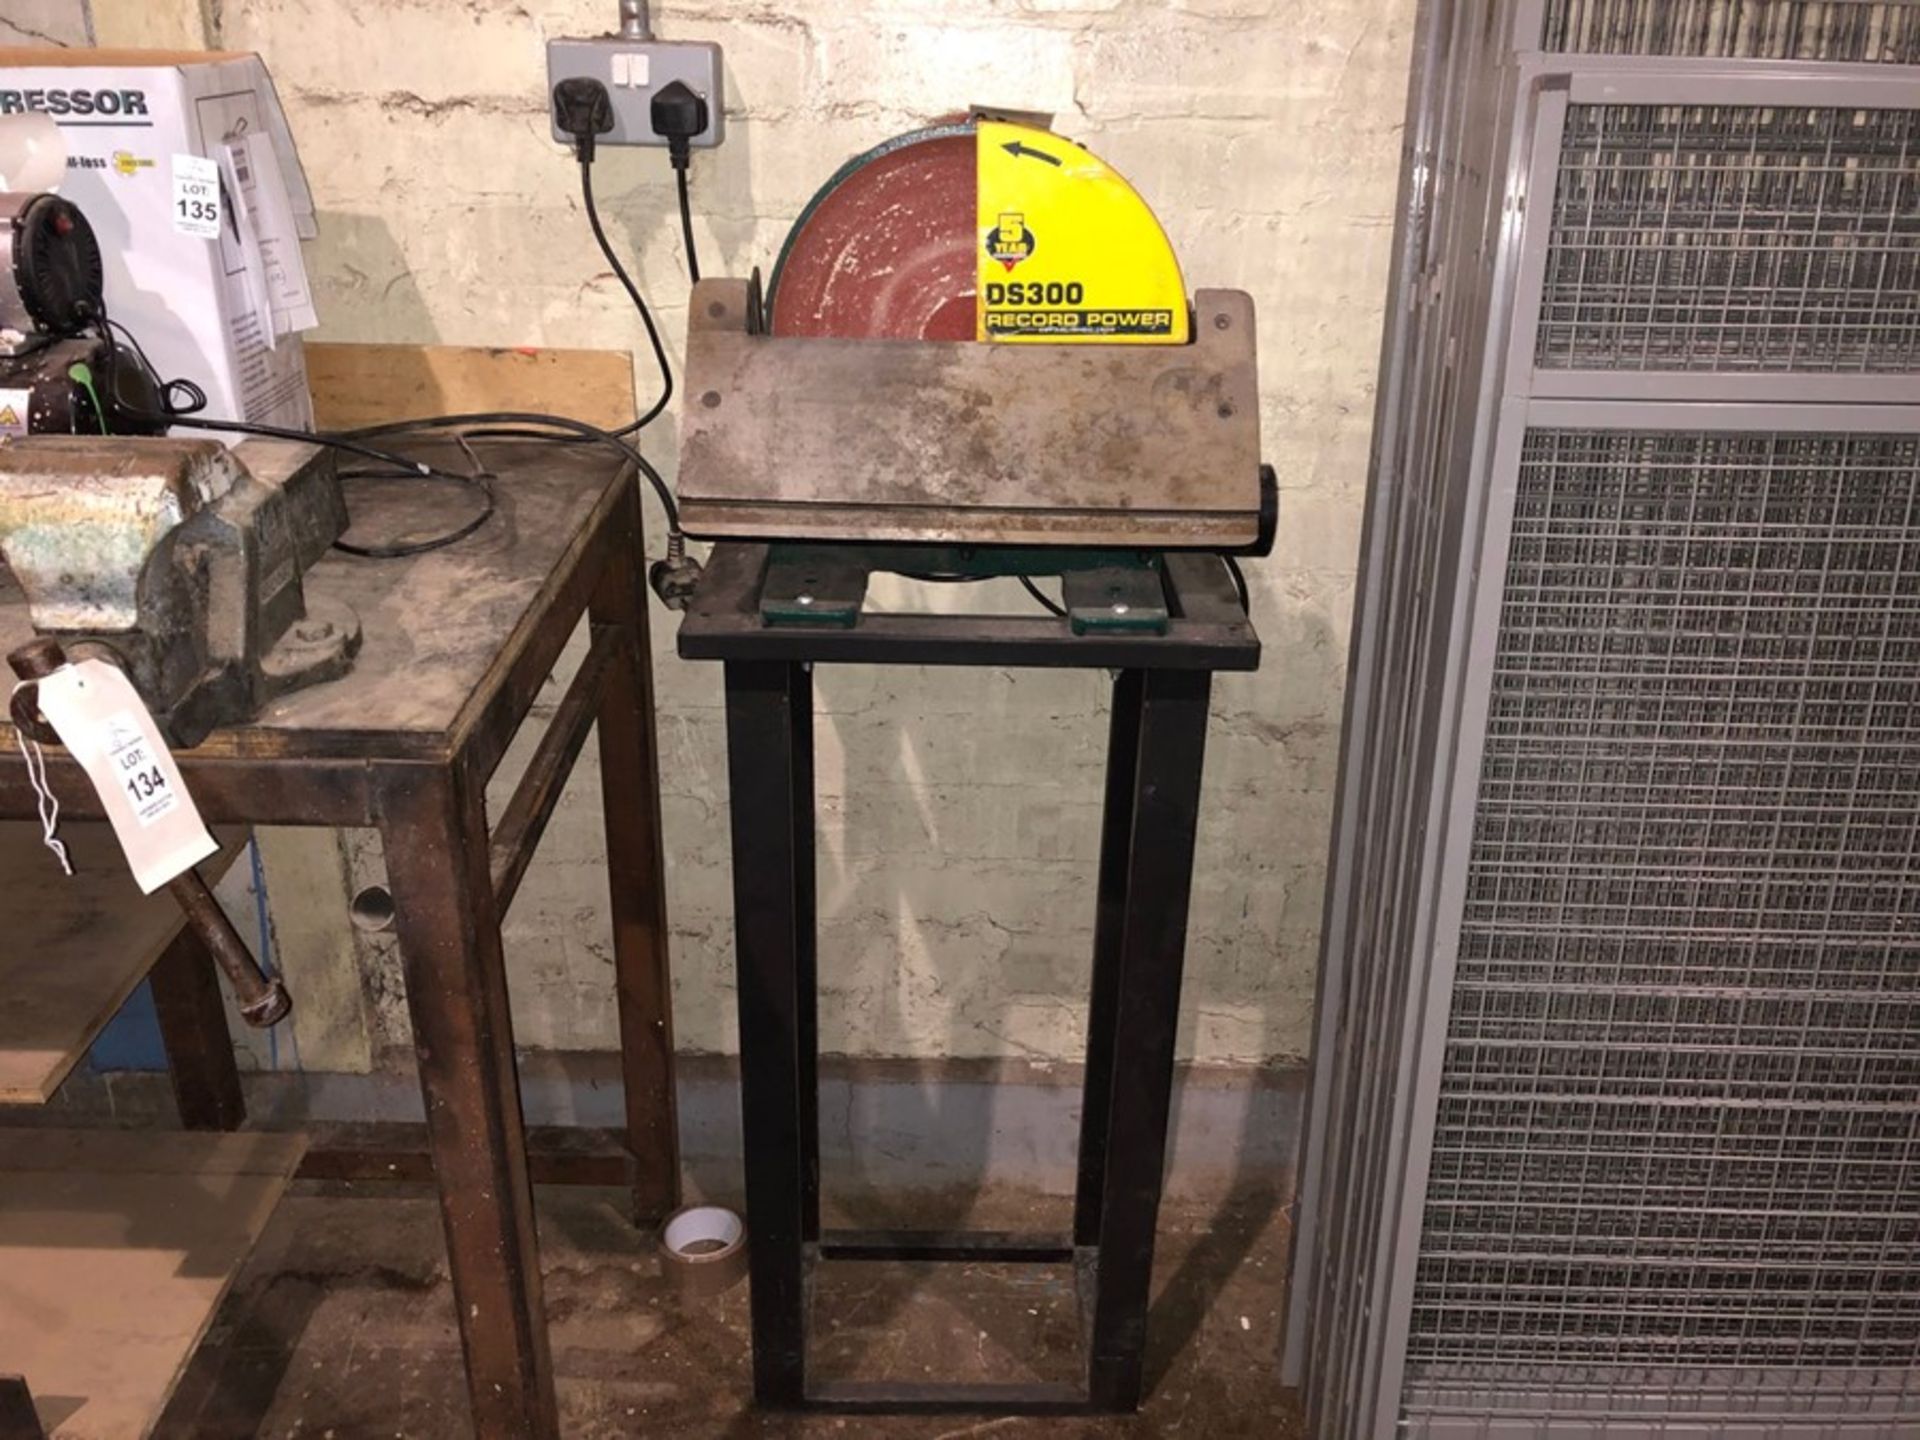 RECORD POWER DS300 SANDER (WORKING)